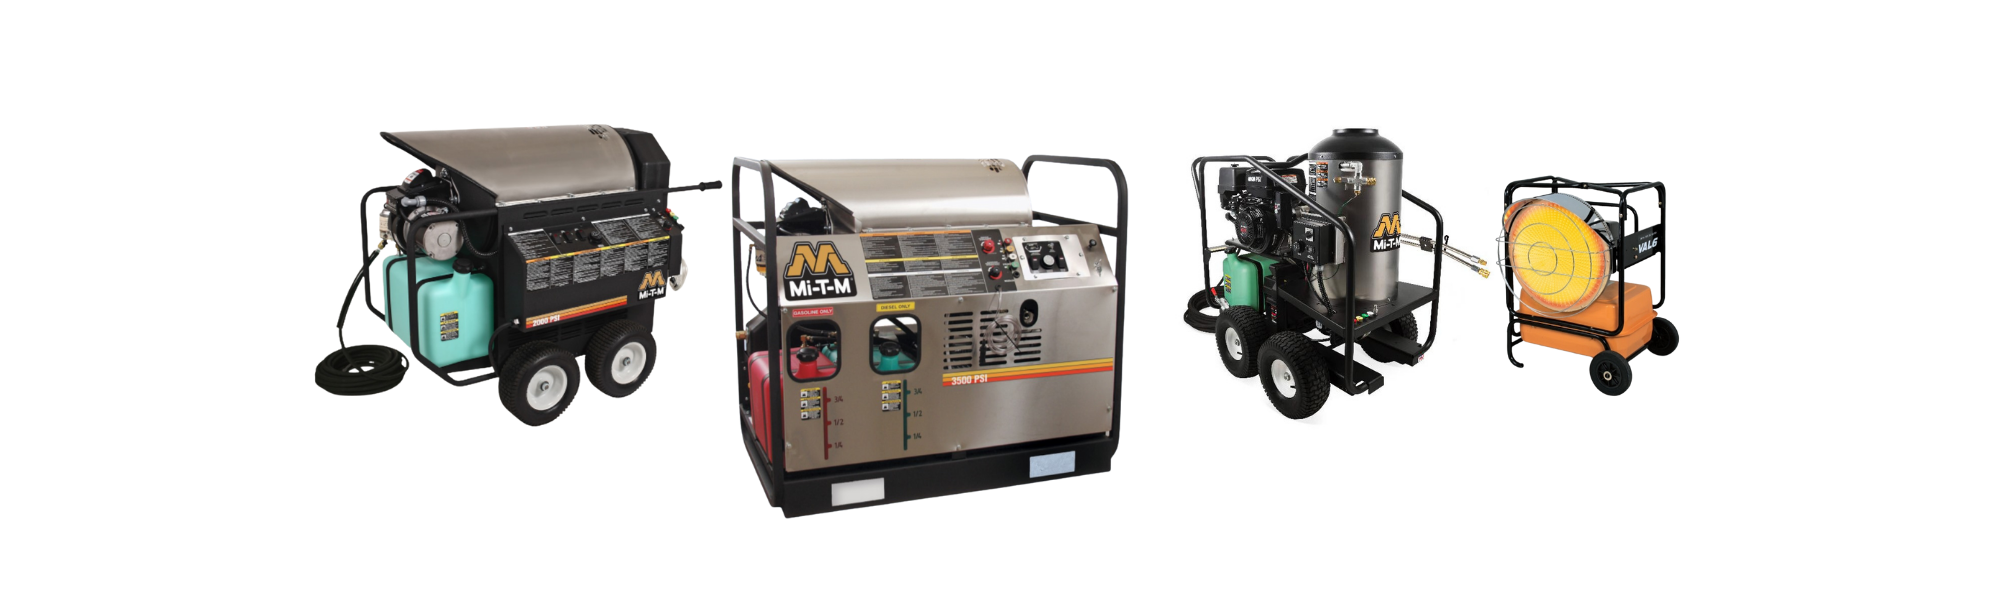 commercial cleaning products including pressure washers and heaters